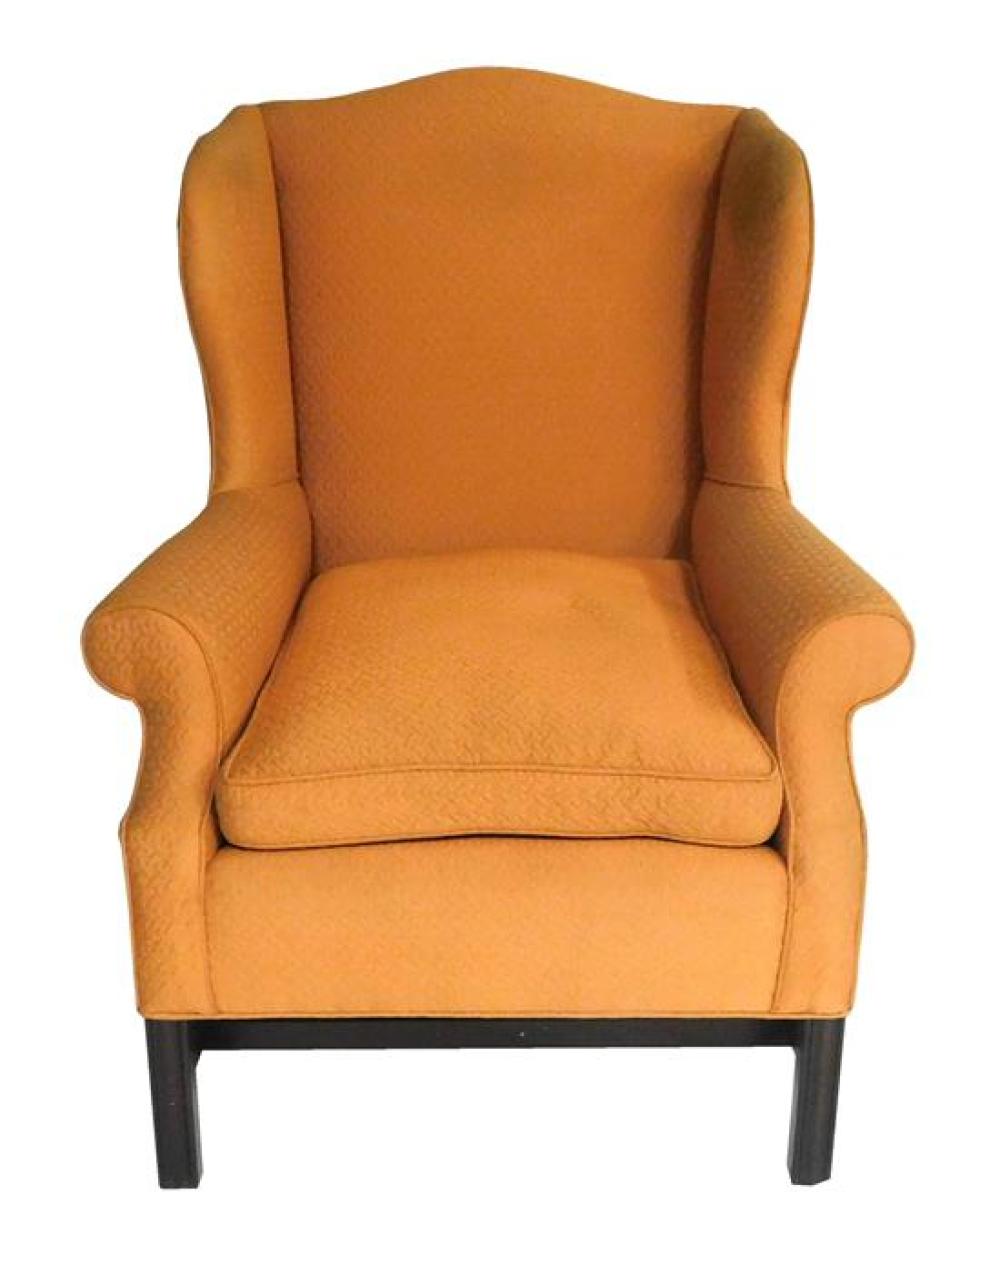 PERSIMMON COLORED UPHOLSTERED WINGBACK